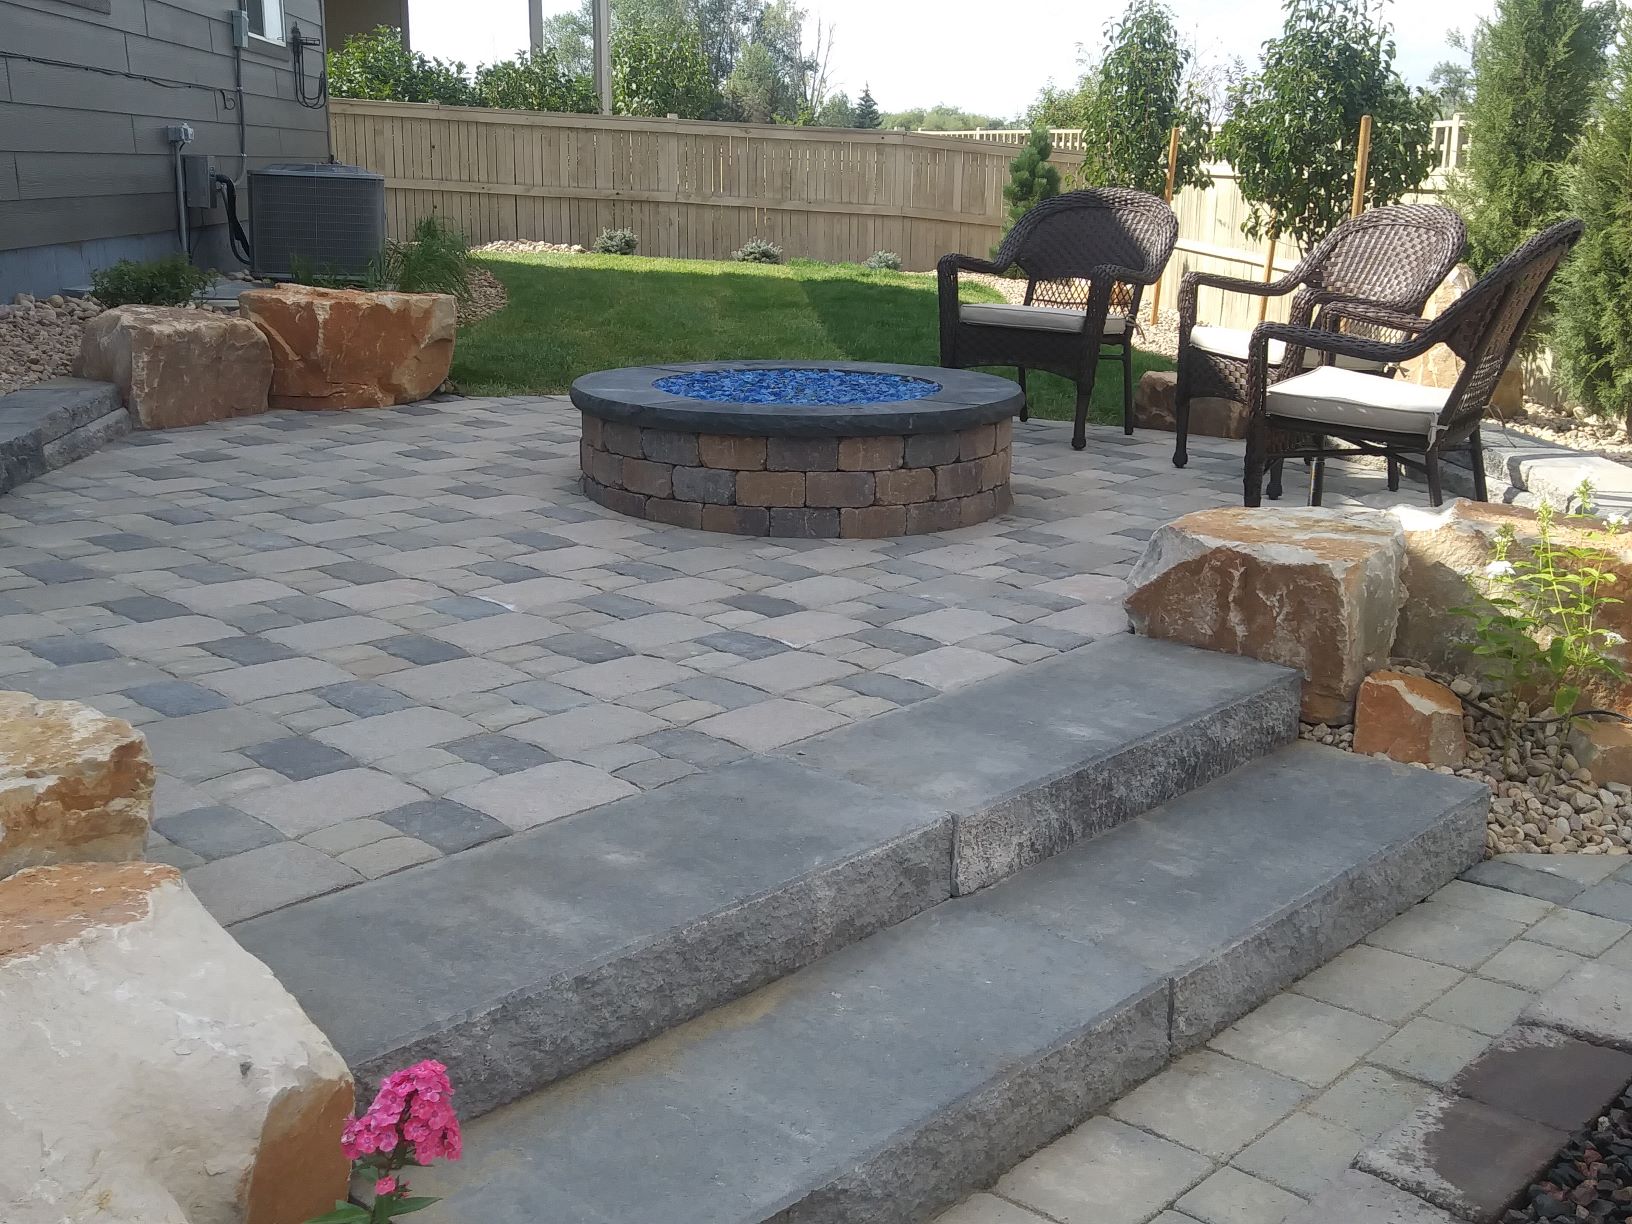 Brick laid patio with flat stone steps and bright blue rock pit in the center.